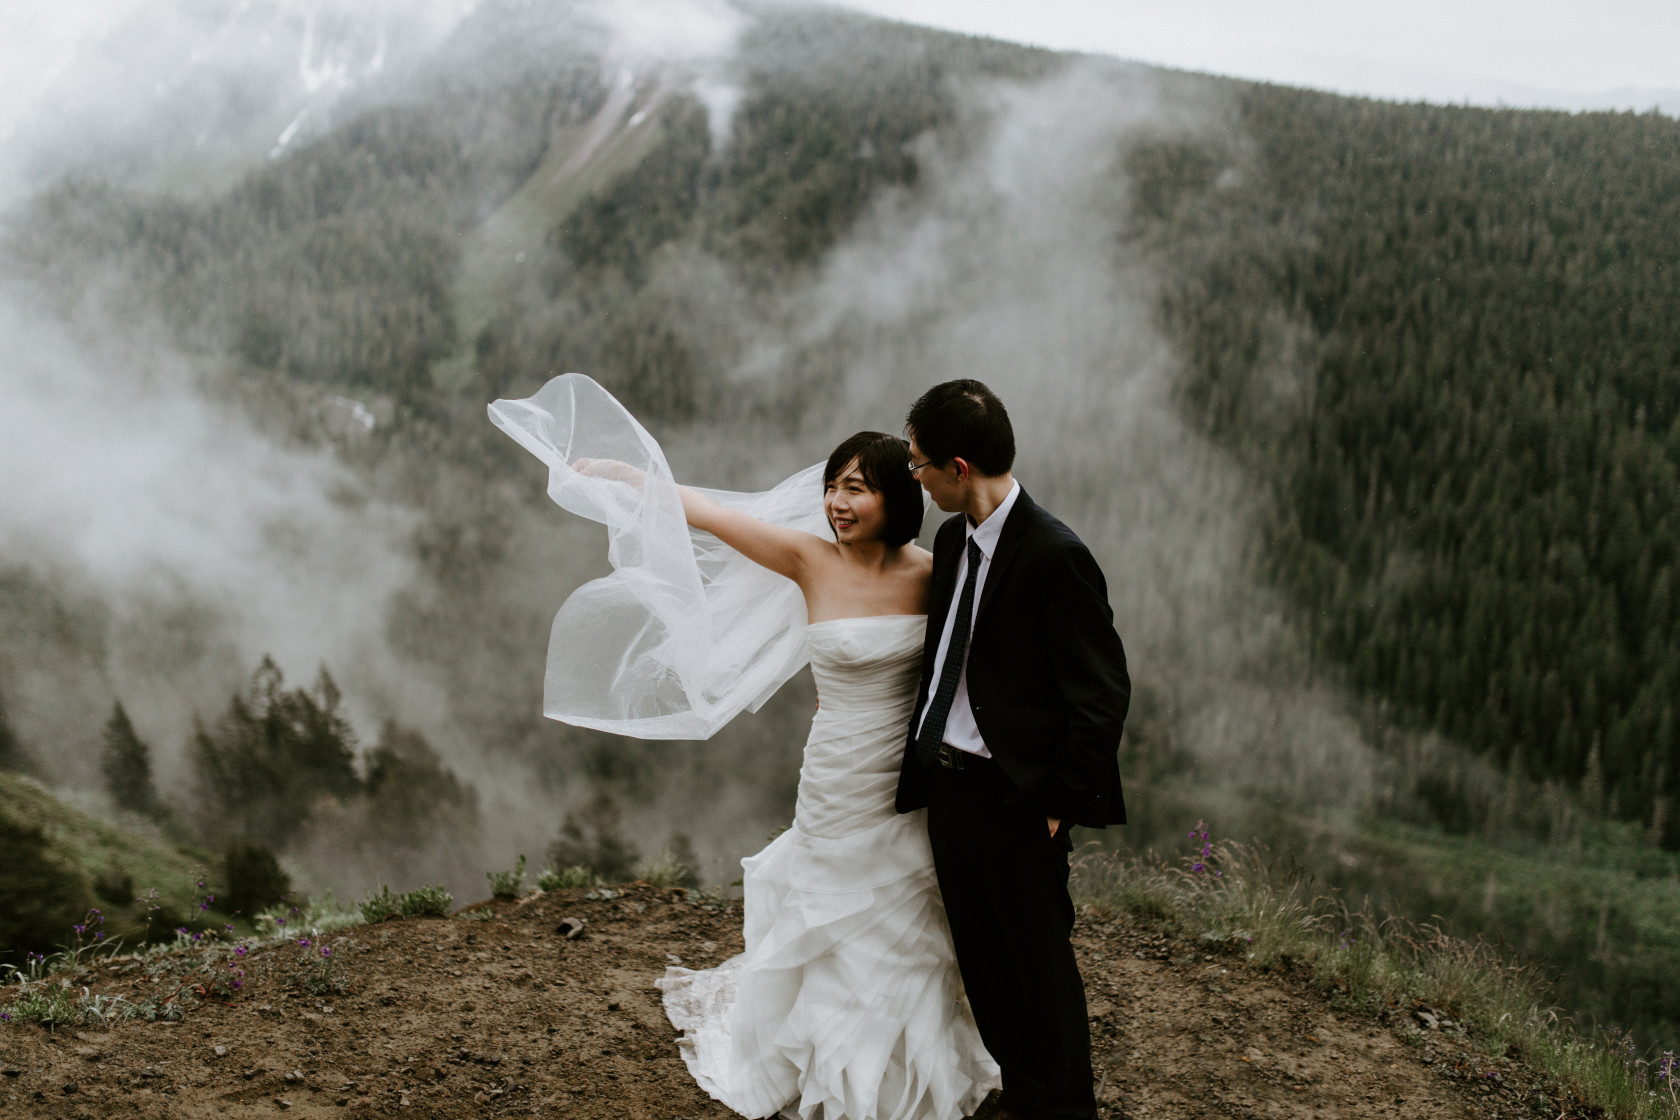 Valerie tosses her veil into the wind. Elopement wedding photography at Mount Hood by Sienna Plus Josh.